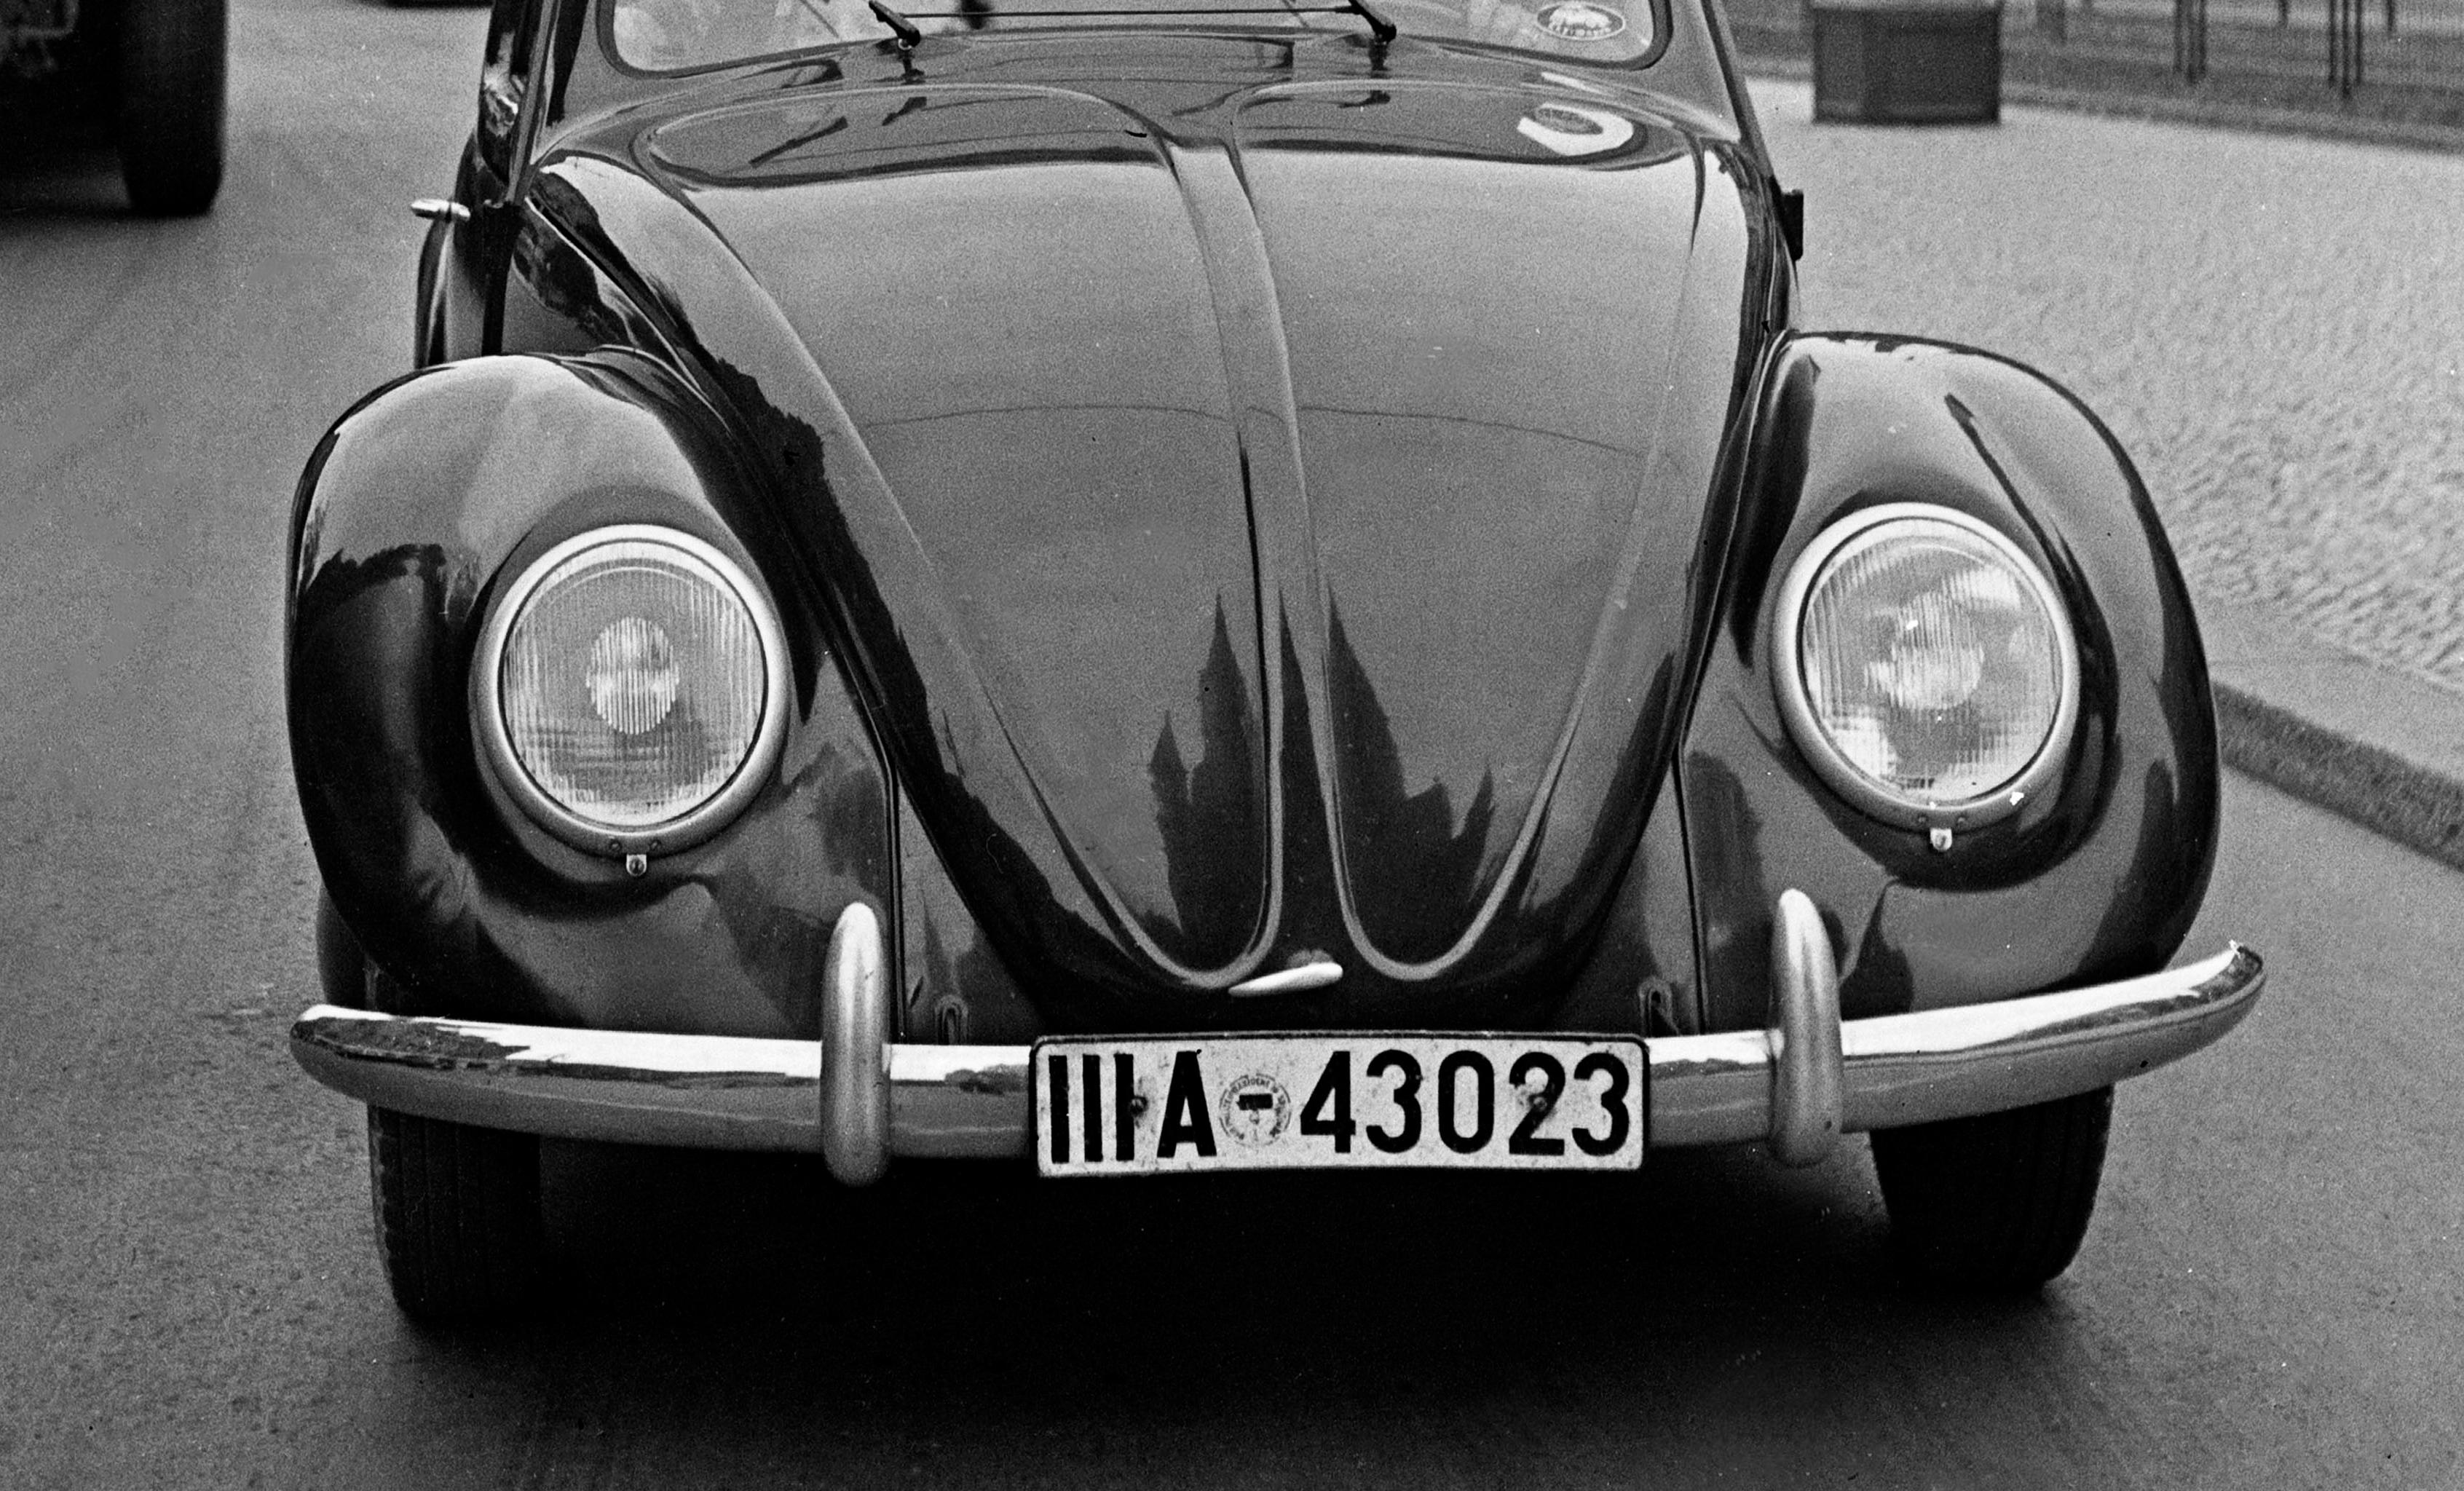 Volkswagen beetle on the streets in Berlin, Germany 1939 Printed Later  - Photograph by Karl Heinrich Lämmel